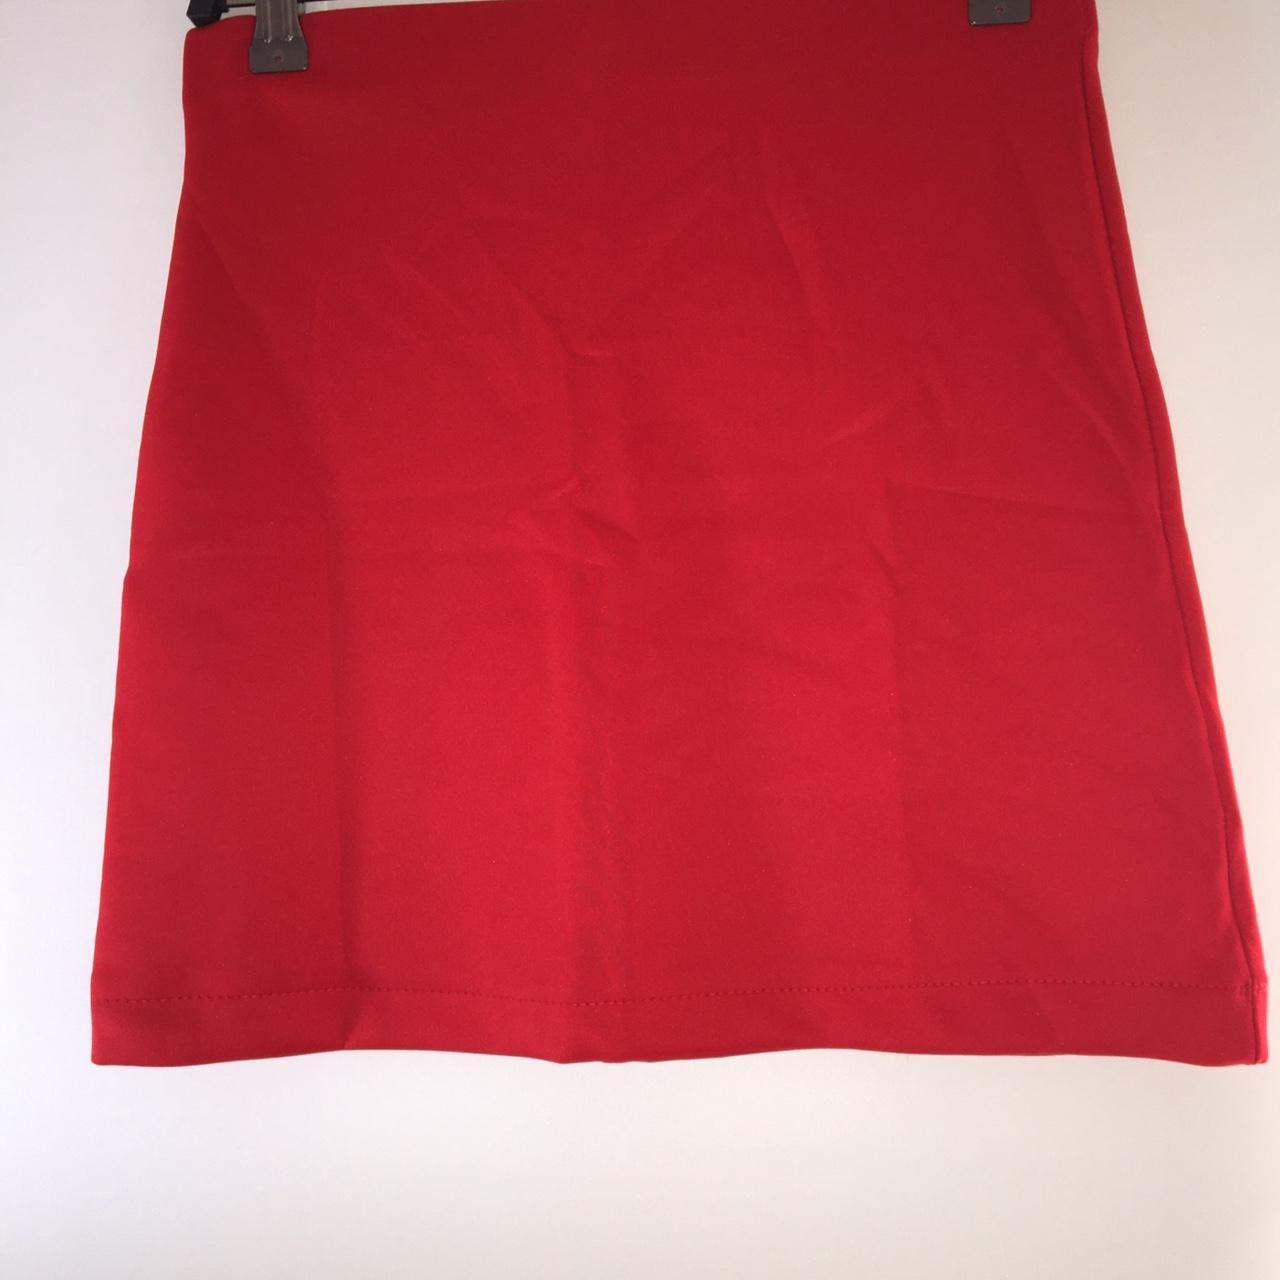 New Vibrant Red Skirt Size 12 Brand New with generic... - Depop